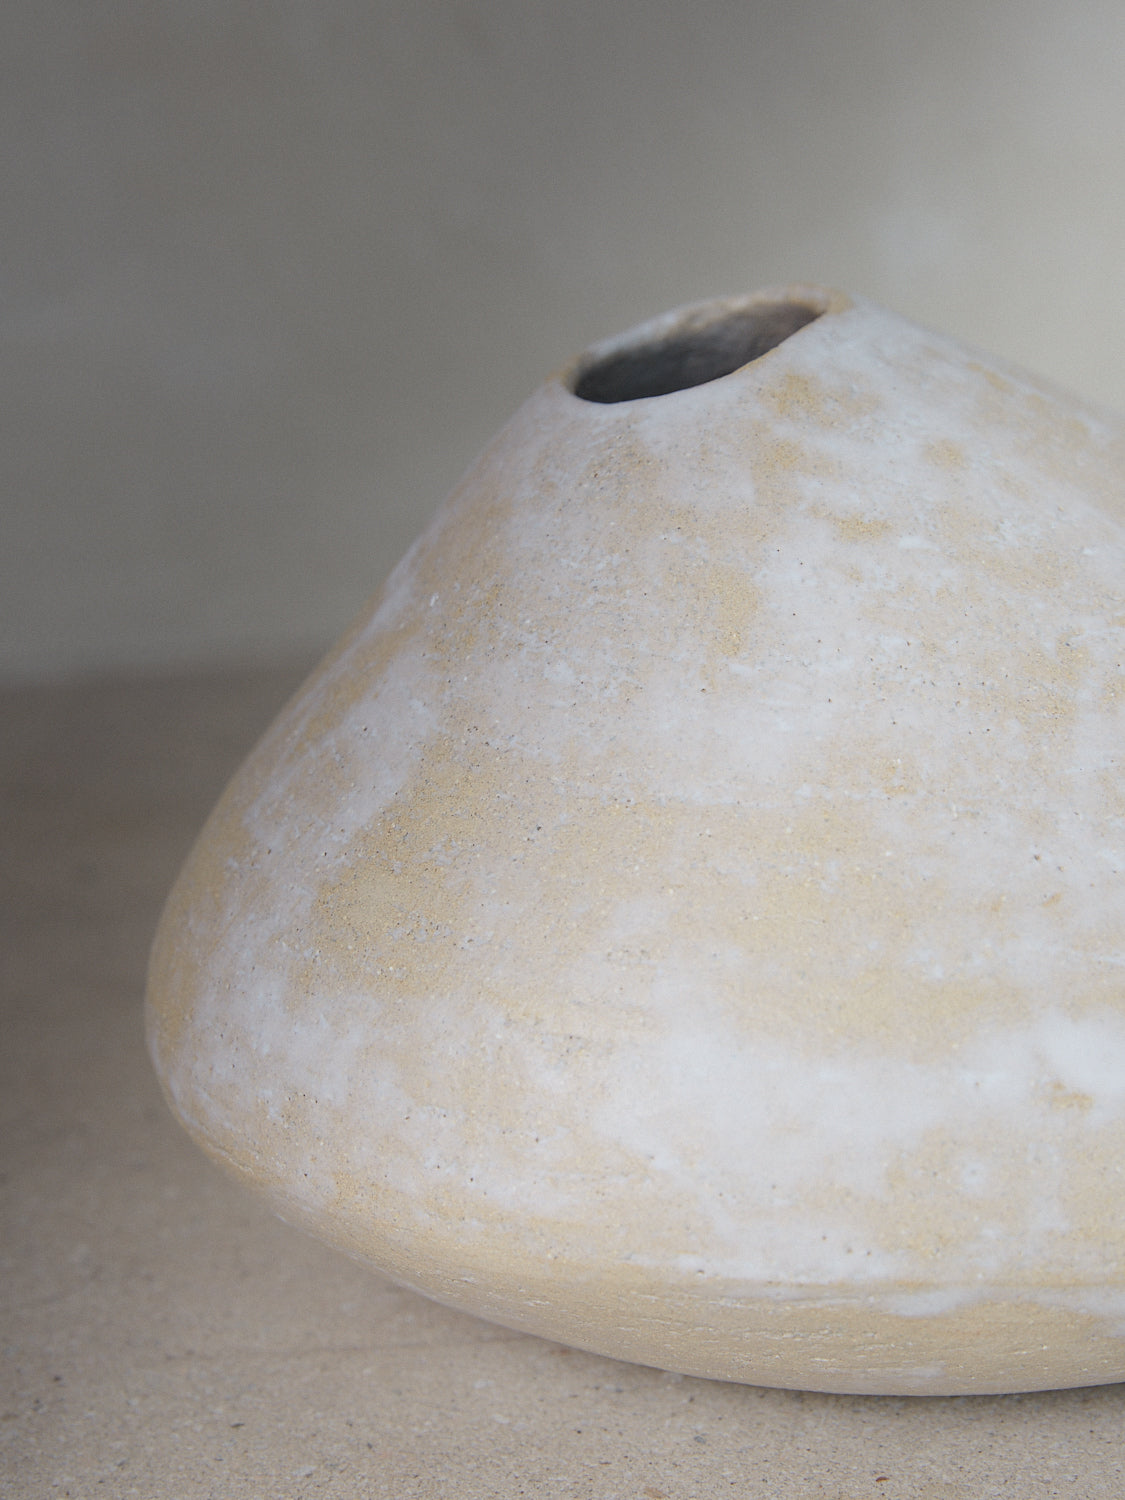 Raw Vase. Exclusively ours. A statement vase inspired by aged river rocks with an irregular oblong shape in a matte sand finish.